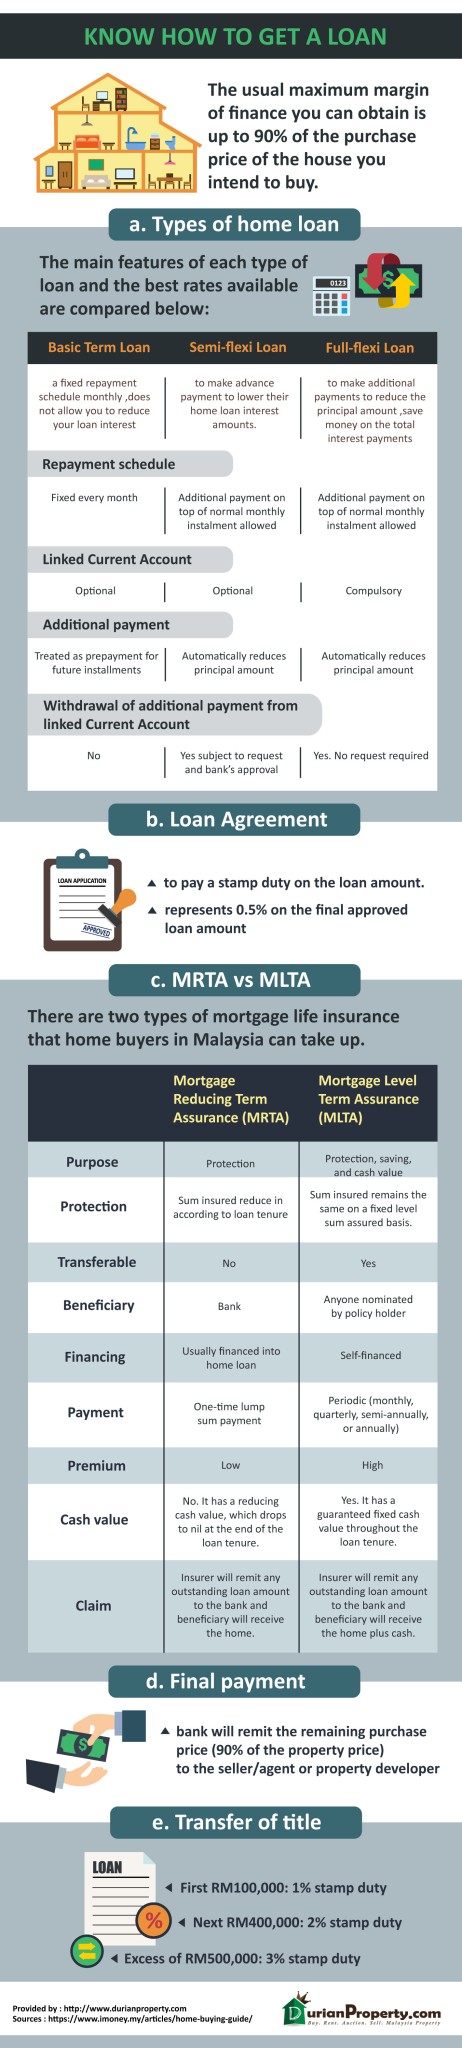 Know How to Get a Loan